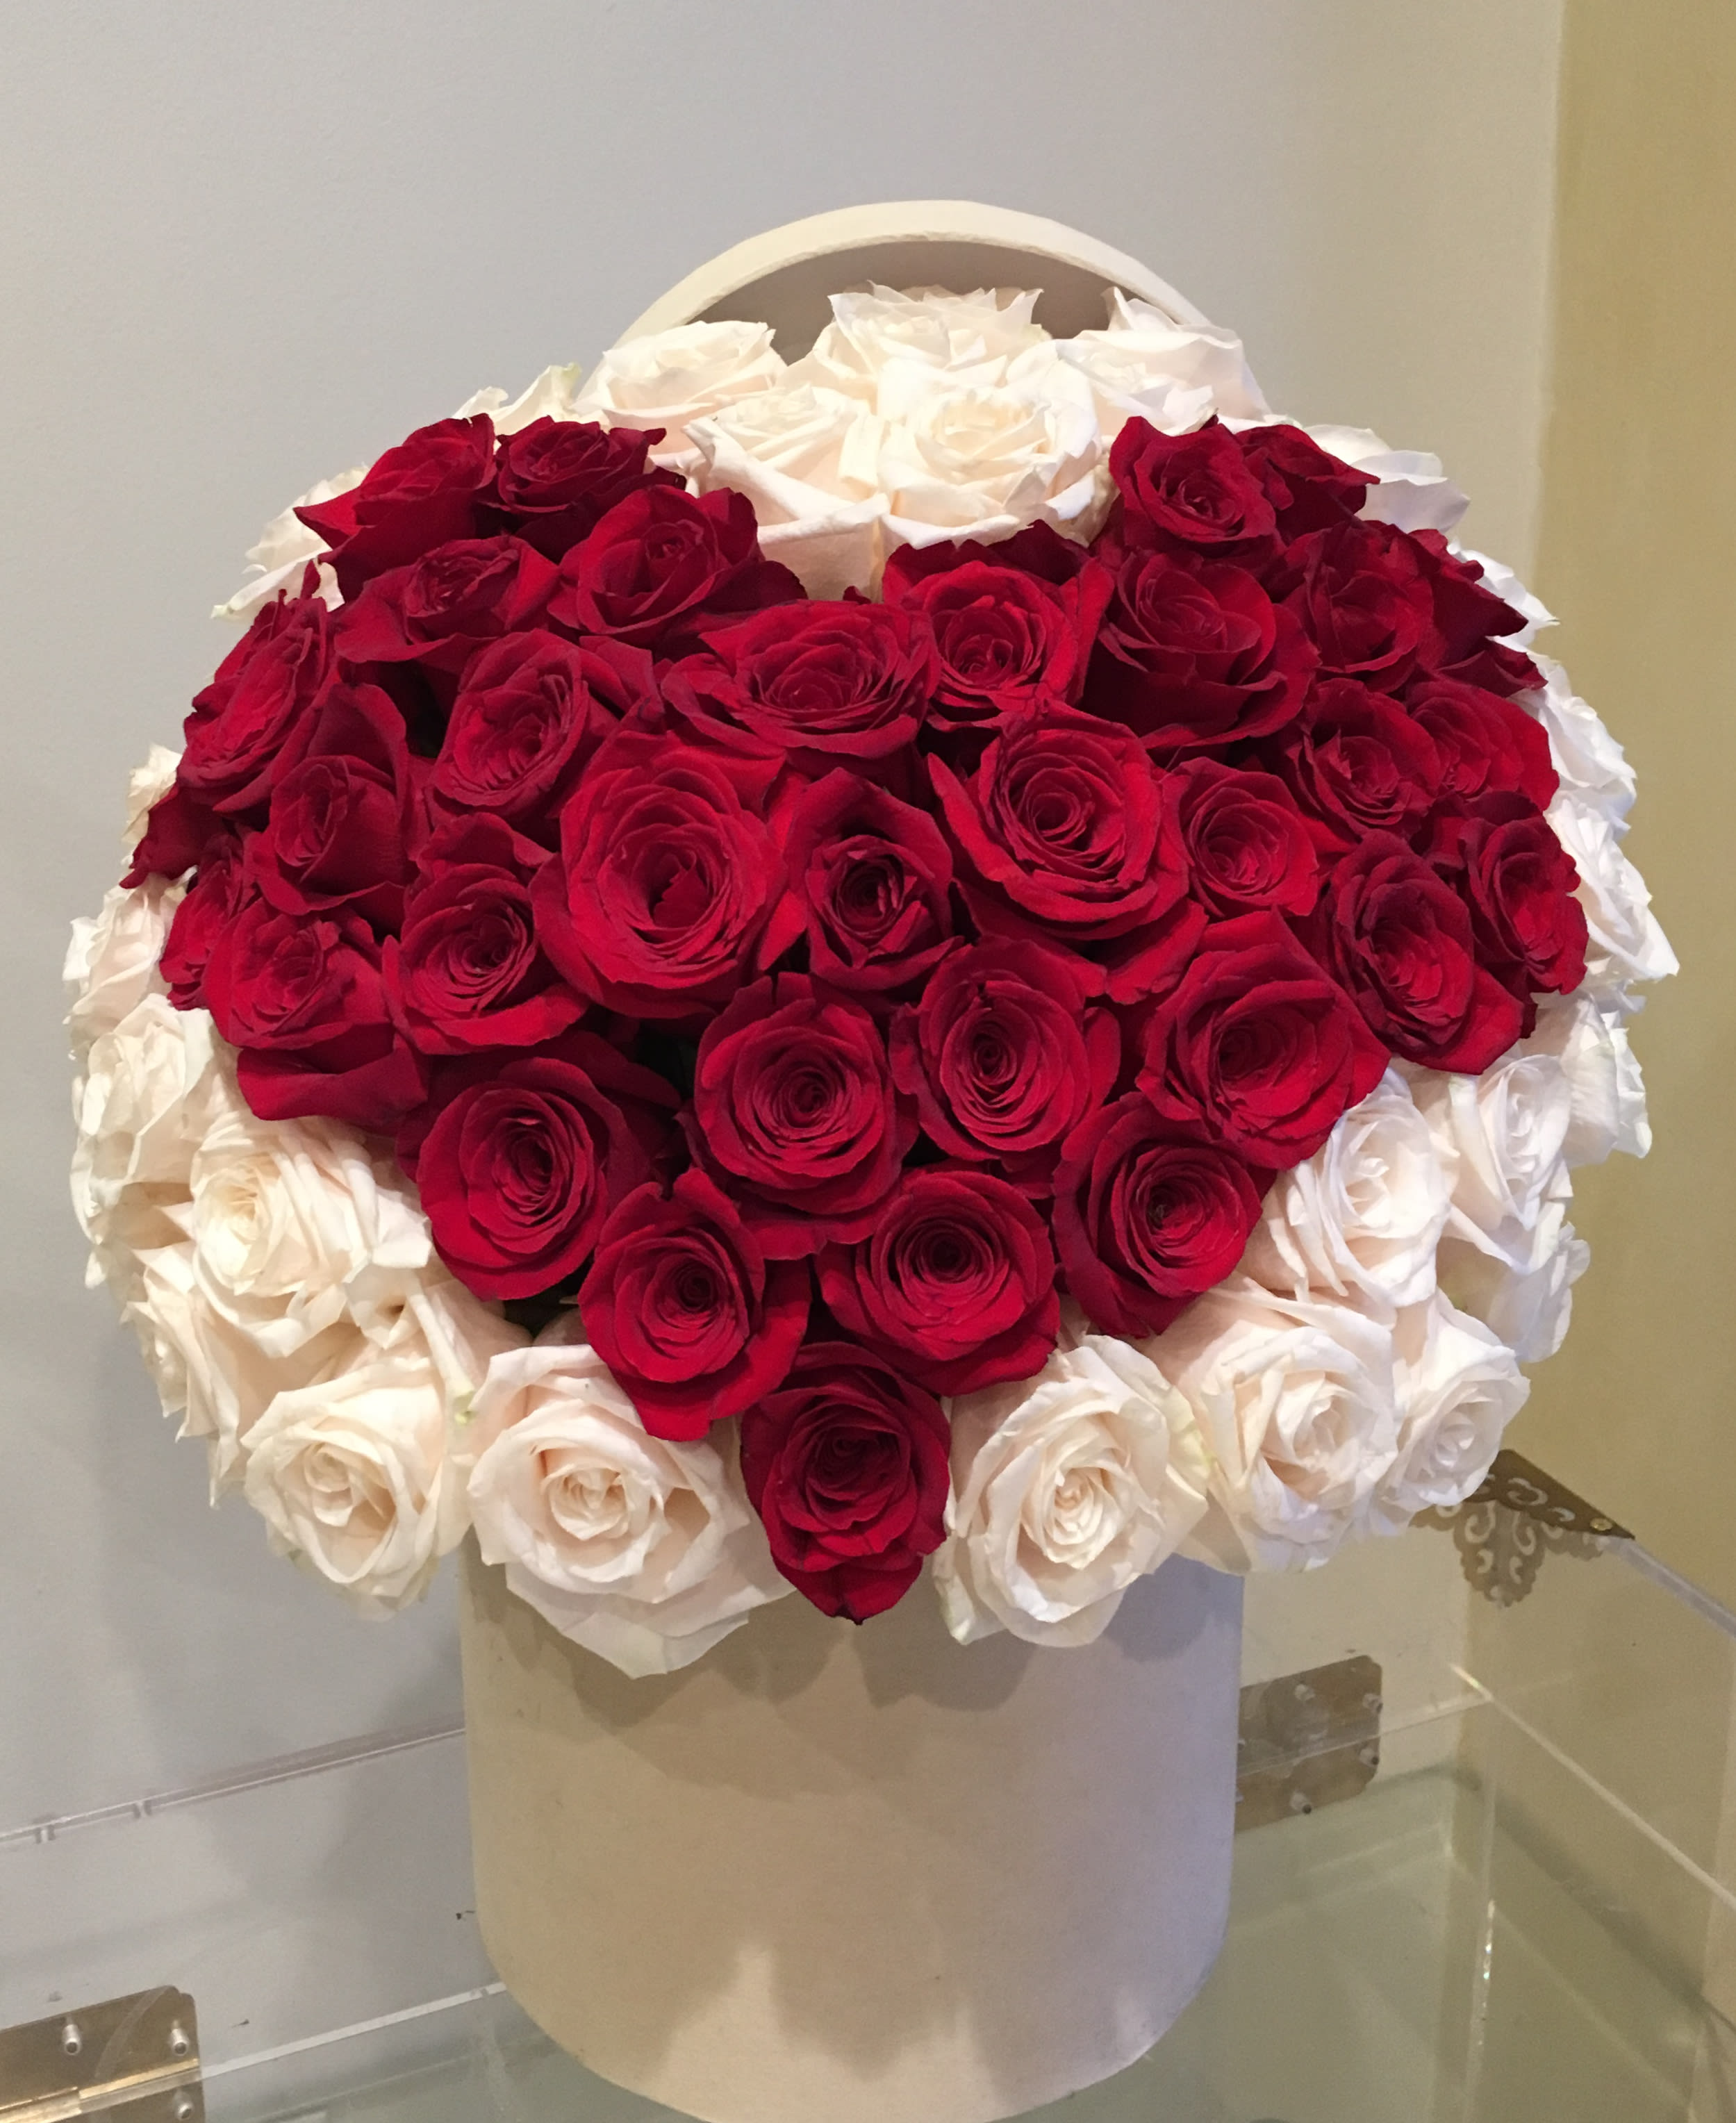 50 Roses 'Heart Shaped' (Red & White)